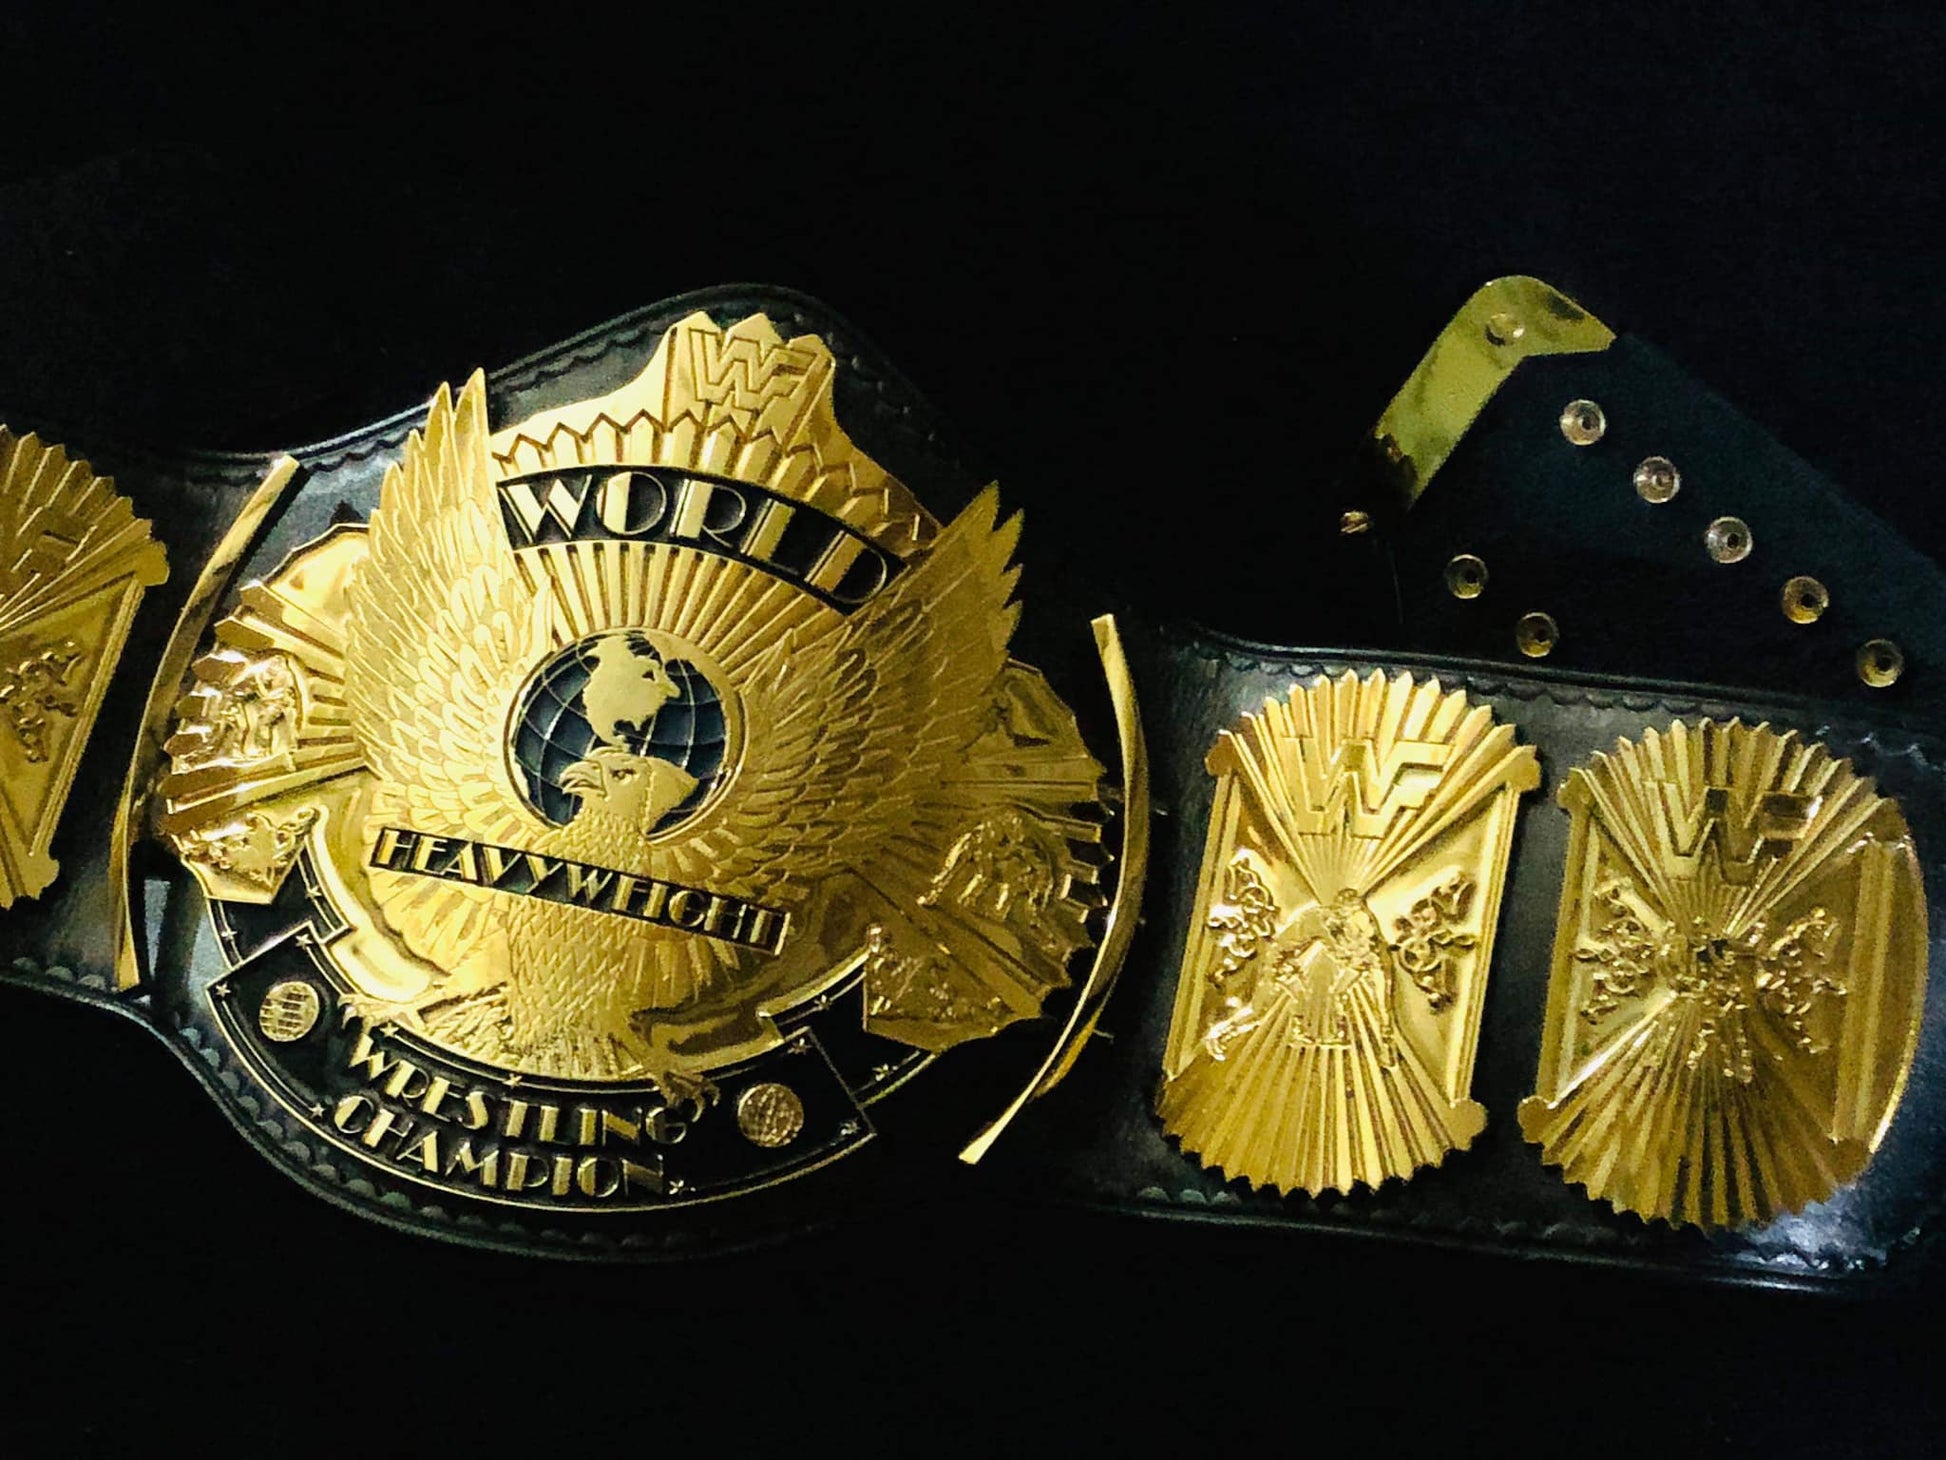 Eagle Series Championship Belts - thick metal and polished and chrome